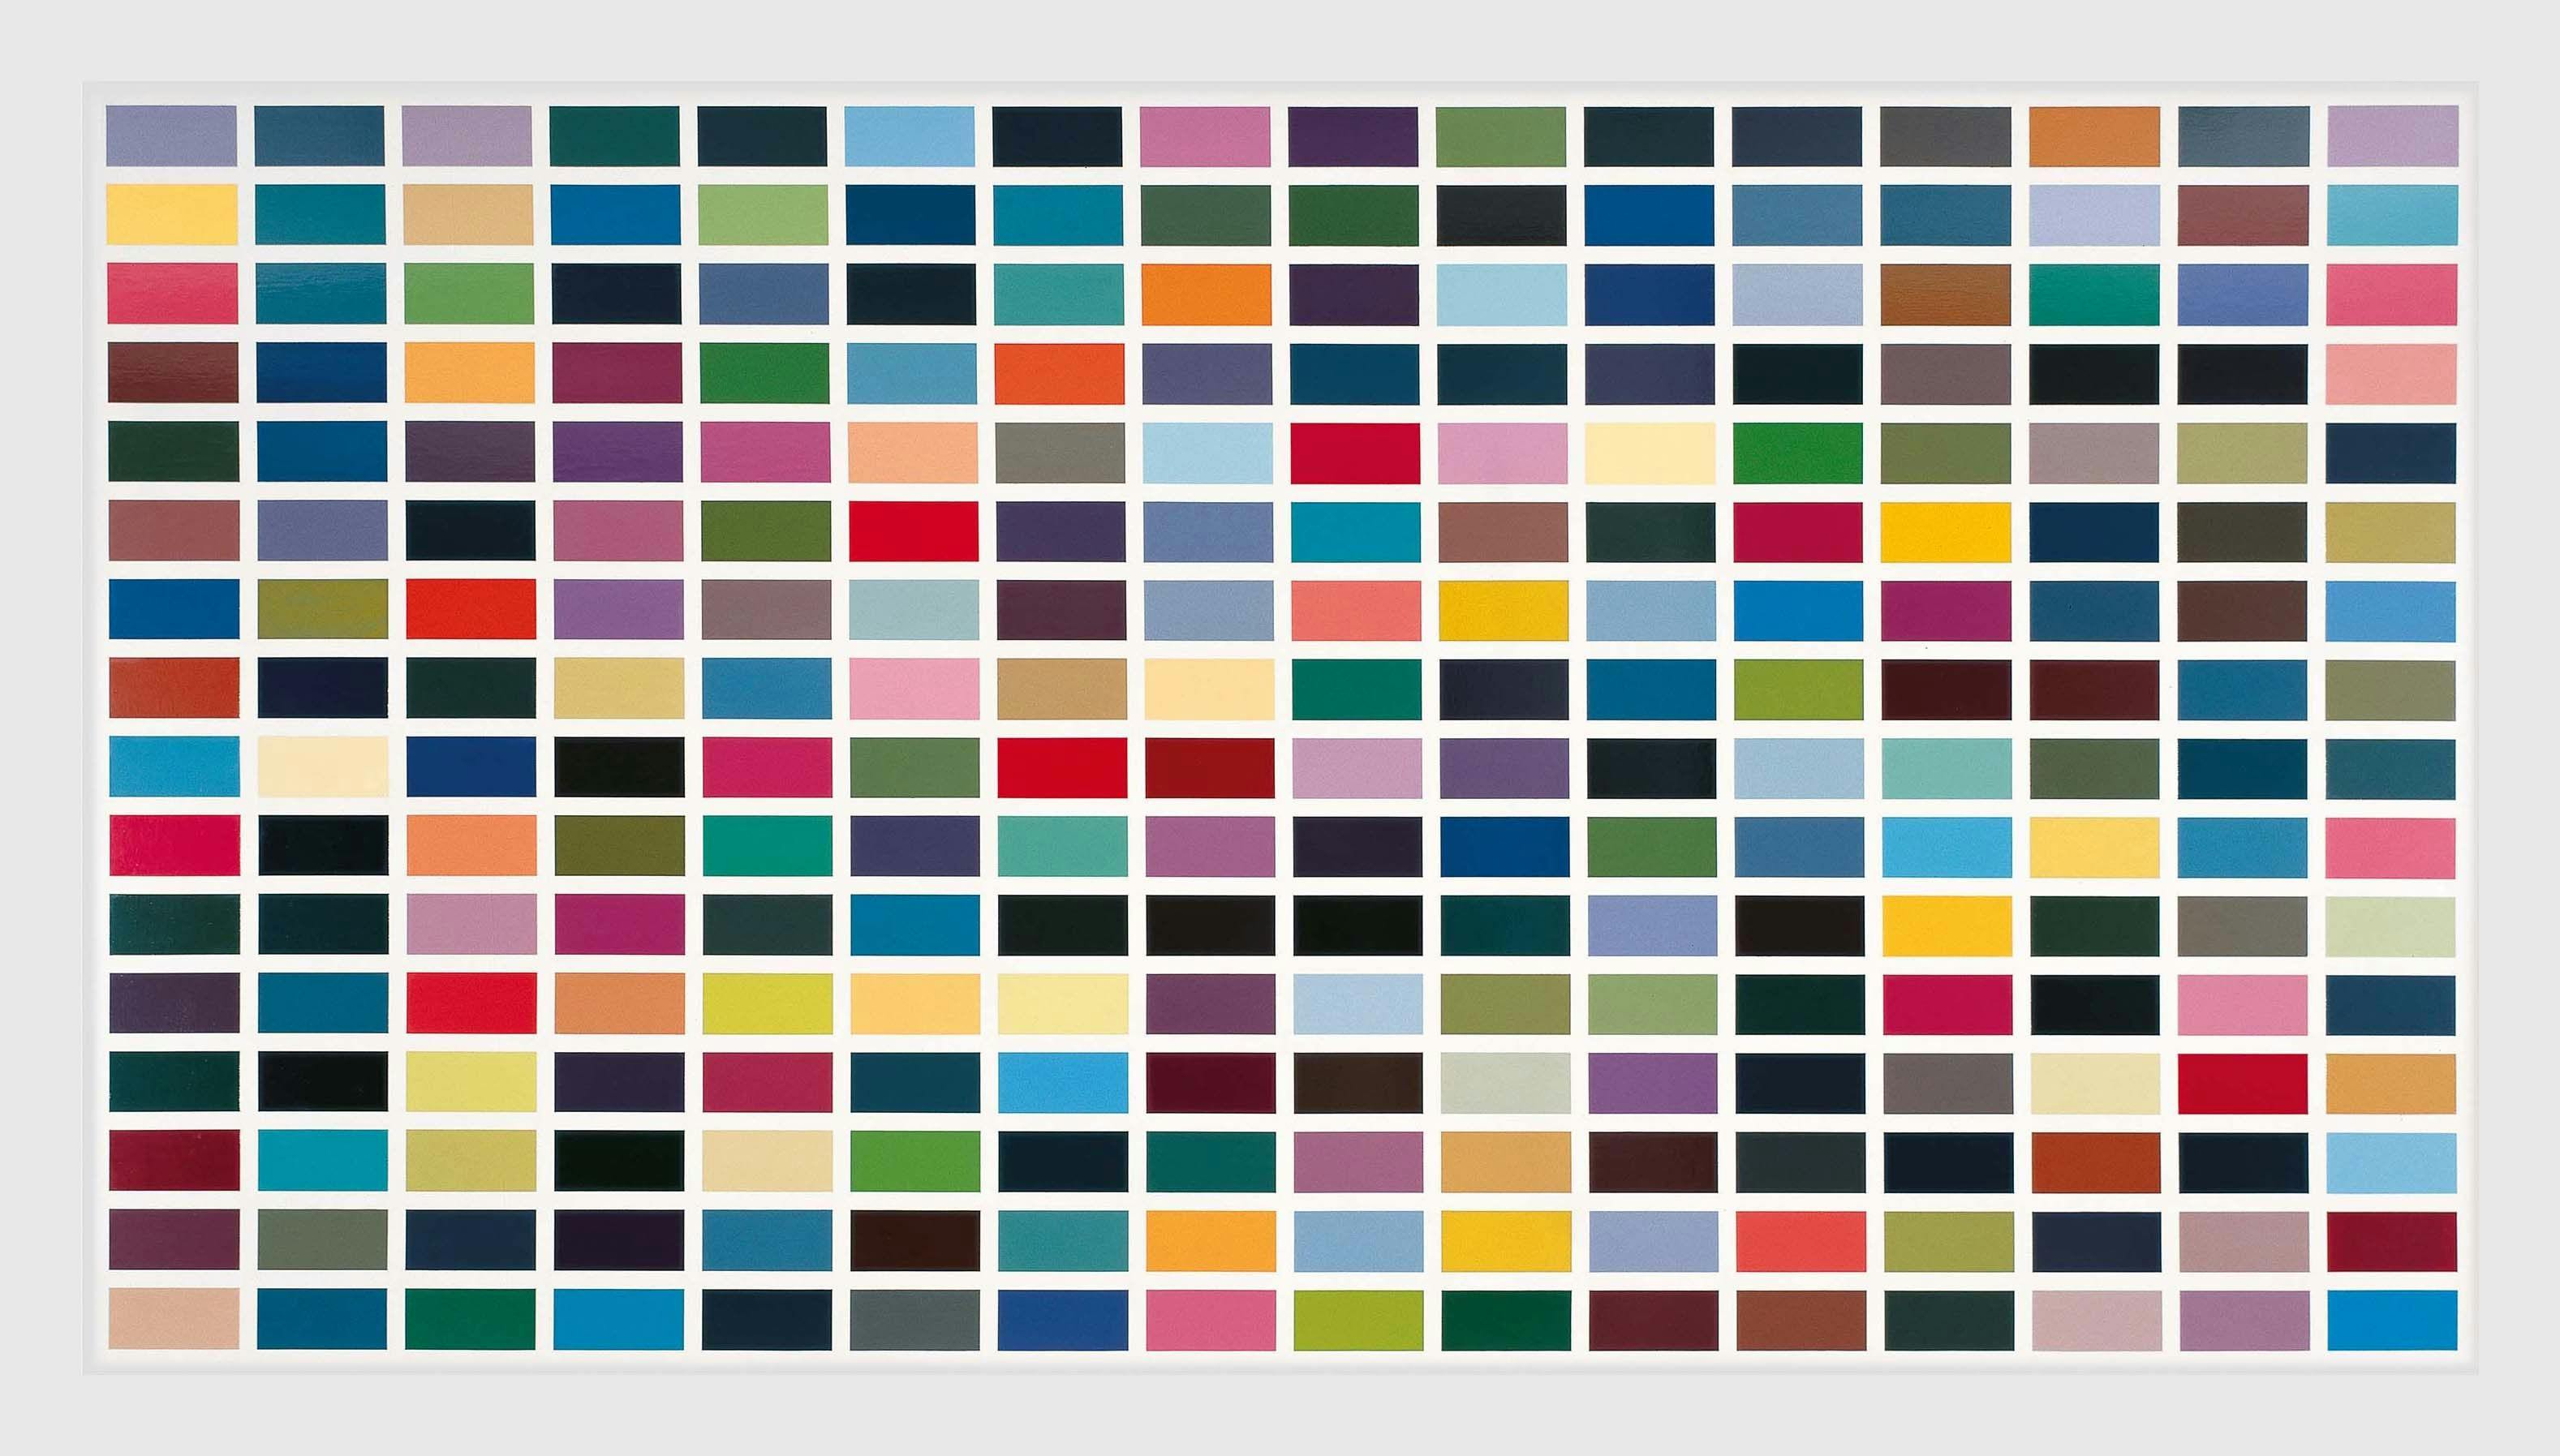 A painting by Gerhard Richter, titled 256 Farben (256 Colors), dated in 1974 and 1984.